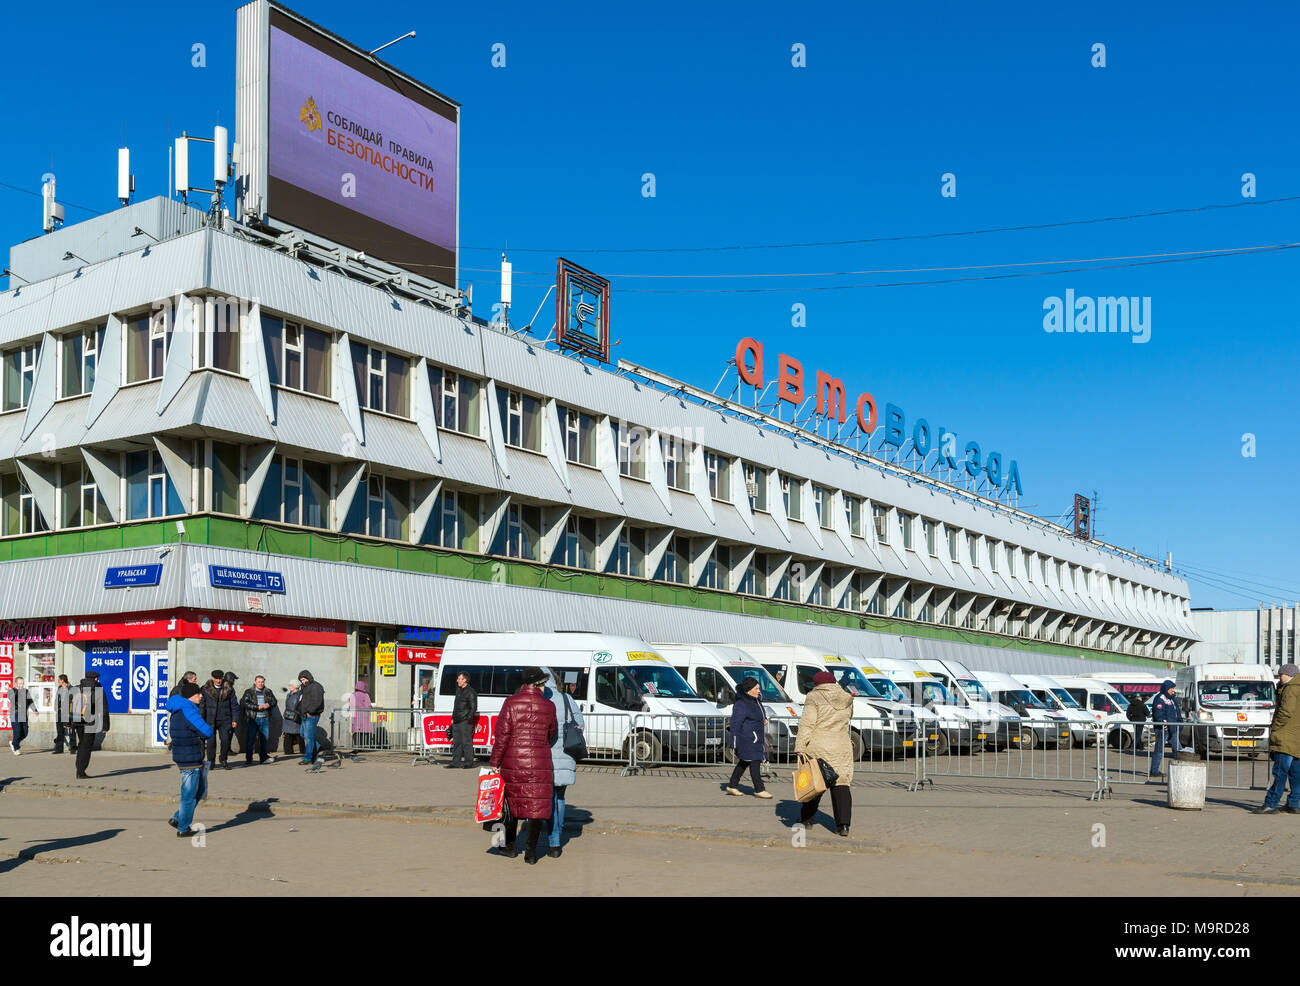 Moscow, Russia - March 23. 2016. People in square in front of the Shchelkovo bus station Stock Photo